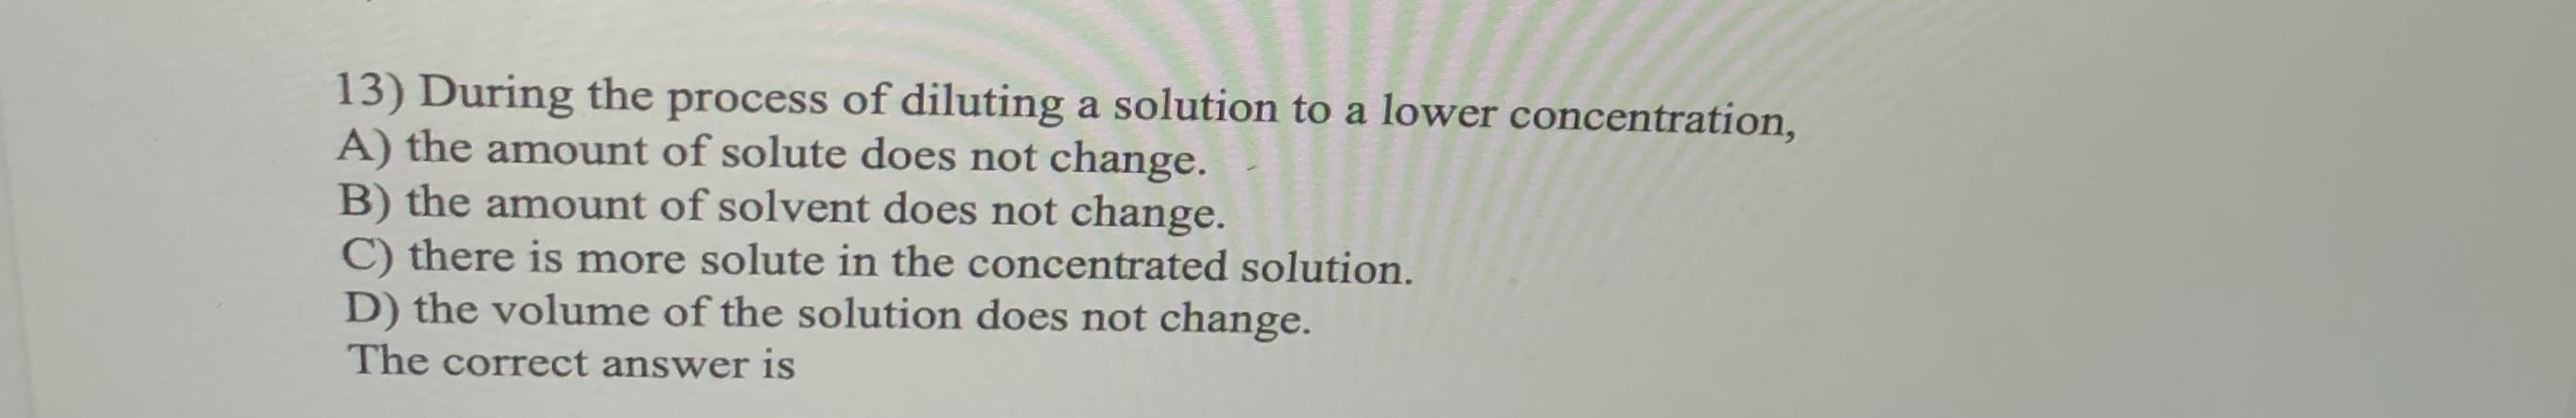 13) During the process of diluting a solution to a lower concentration,
A) the amount of solute does not change.
B) the amount of solvent does not change.
C) there is more solute in the concentrated solution.
D) the volume of the solution does not change.
The correct answer is
